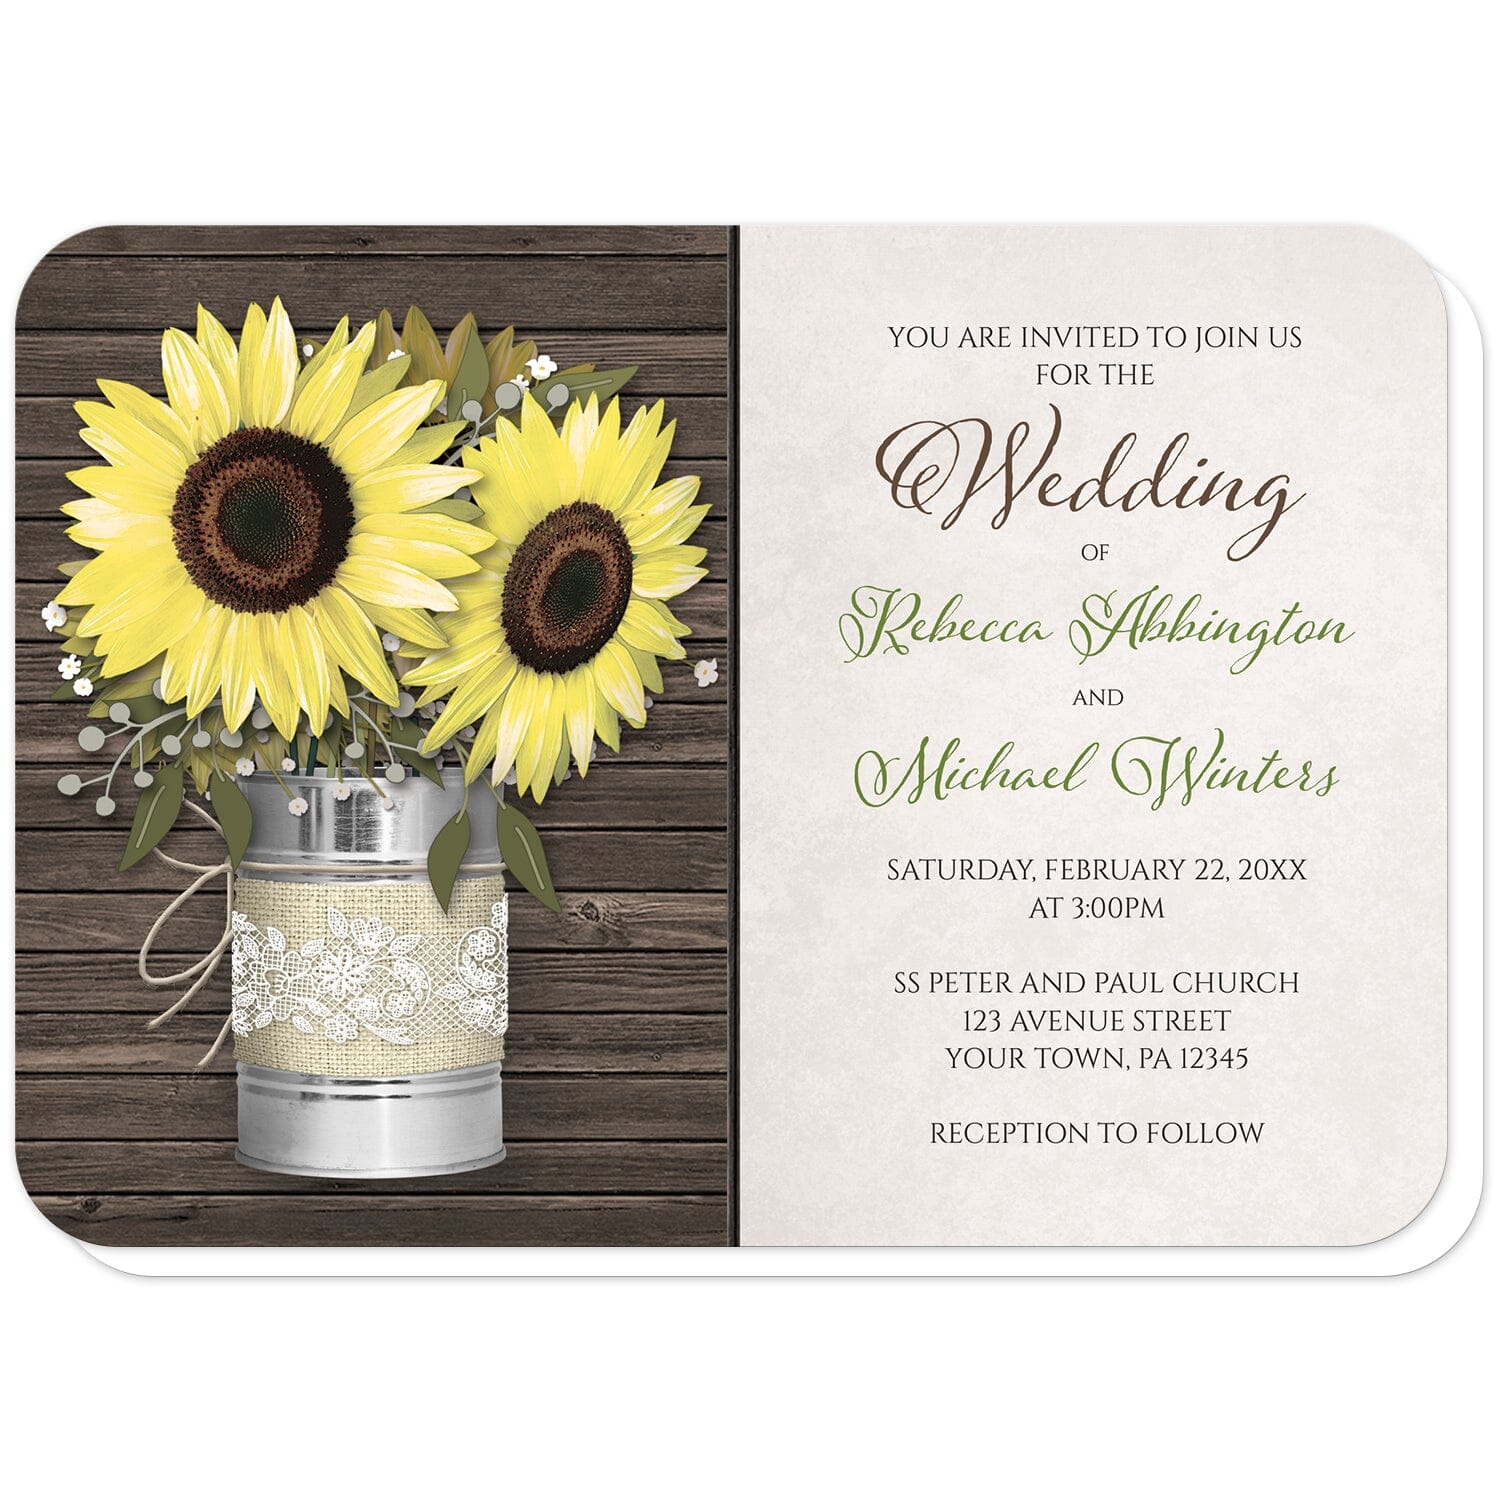 Rustic Burlap and Lace Tin Can Sunflower Wedding Invitations (with rounded corners) at Artistically Invited. Rustic burlap and lace tin can sunflower wedding invitations with an illustration of big yellow sunflowers inside a rustic metal tin can wrapped in burlap and lace and tied with twine over a dark wood background. Your personalized marriage celebration details are custom printed in green and brown over a beige background to the right of the tin can sunflowers.